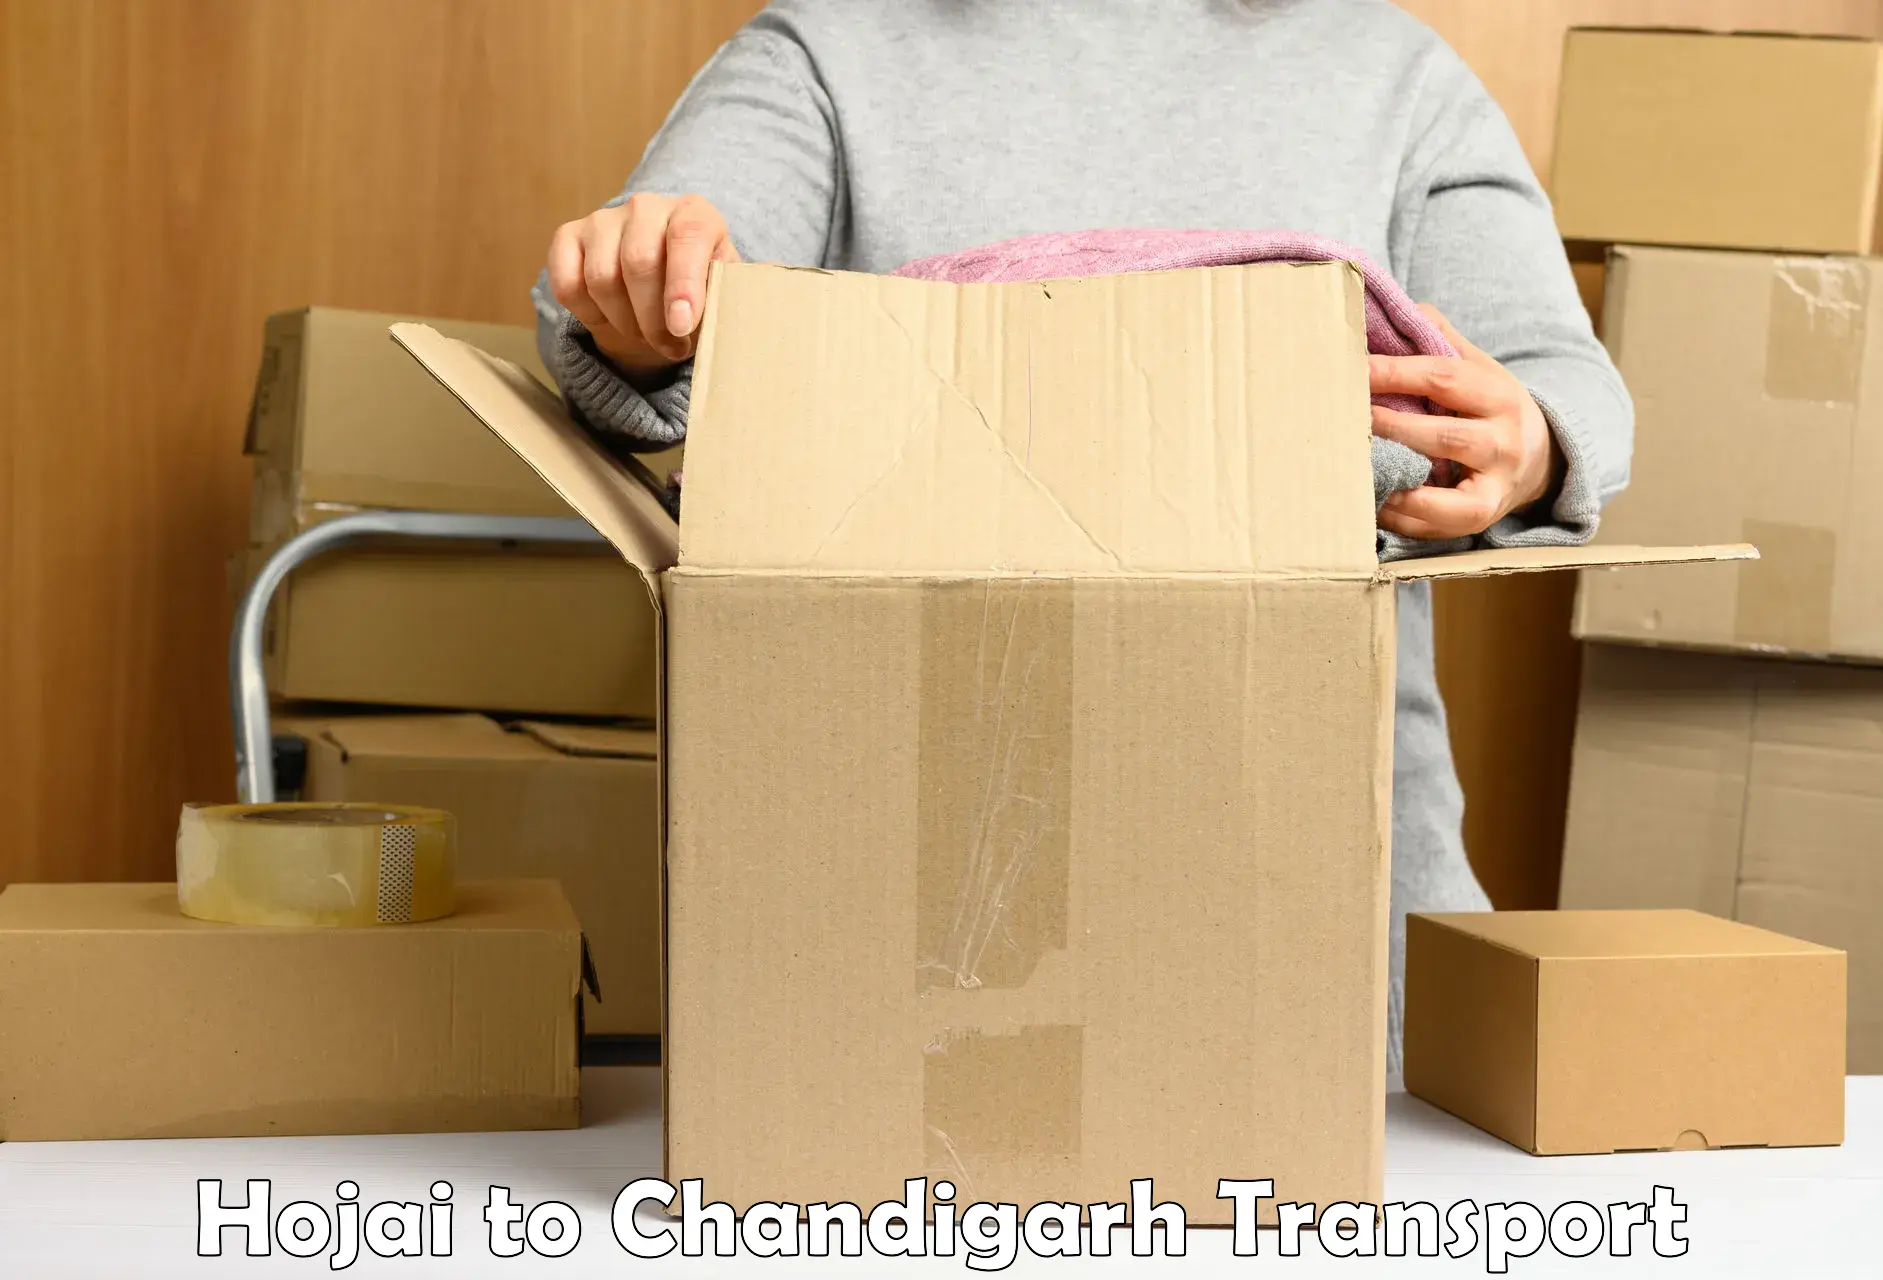 Commercial transport service Hojai to Chandigarh